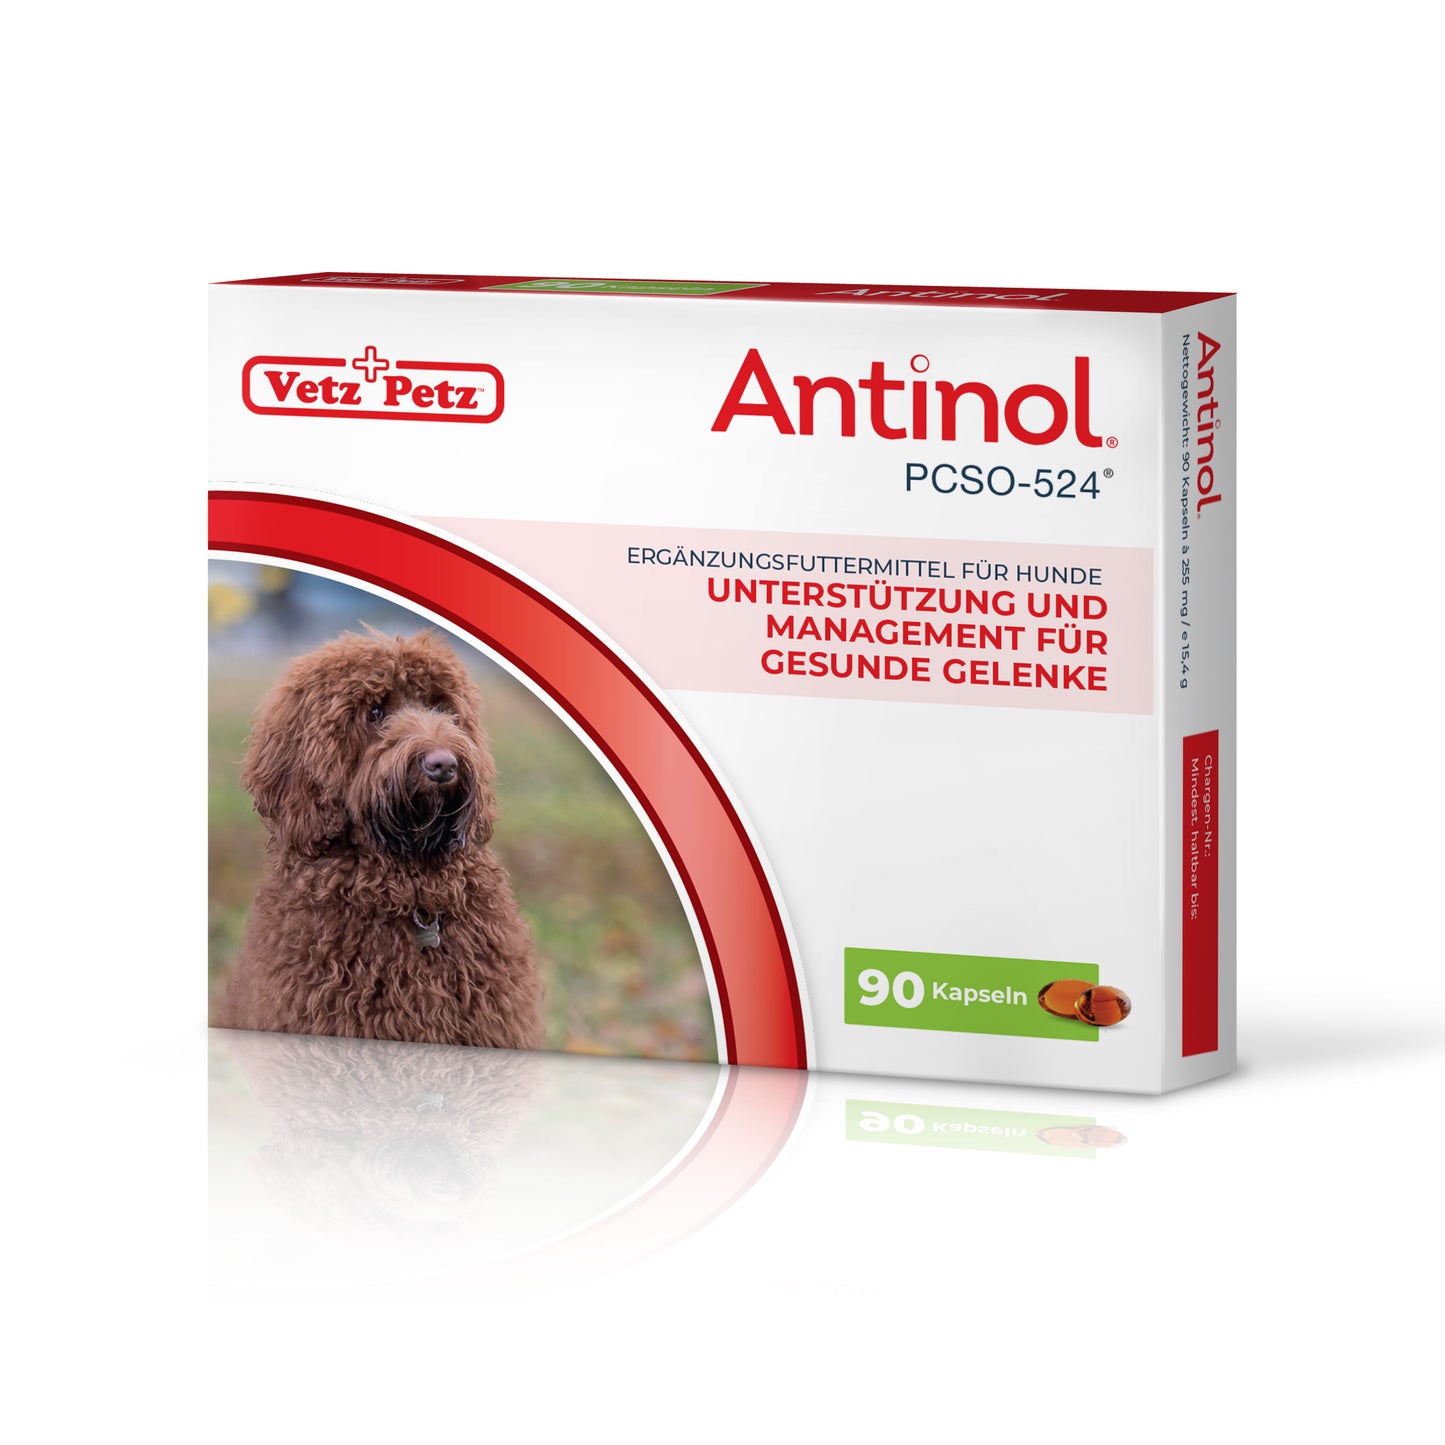 Antinol<sup>®</sup>️ for dogs